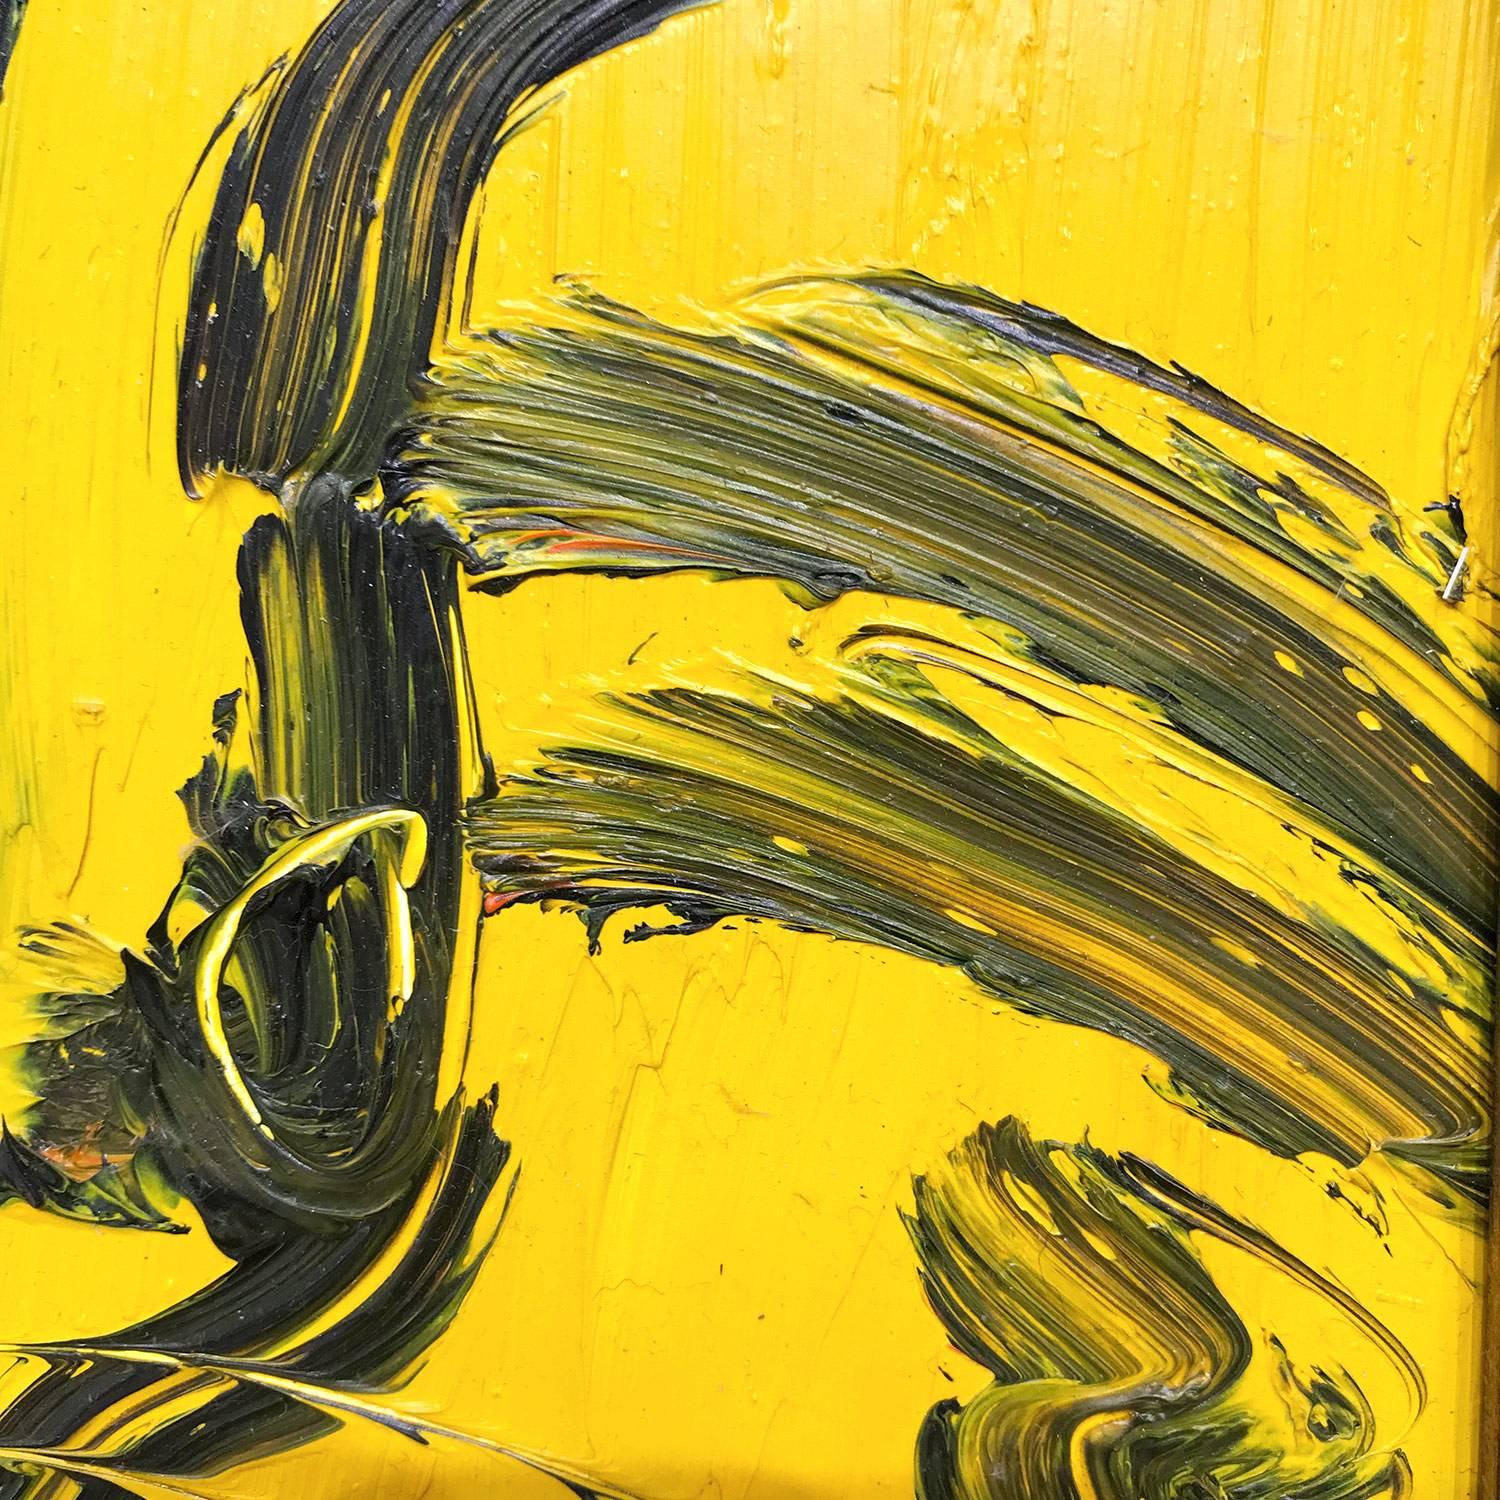 Untitled (Bunny on Yellow) 2